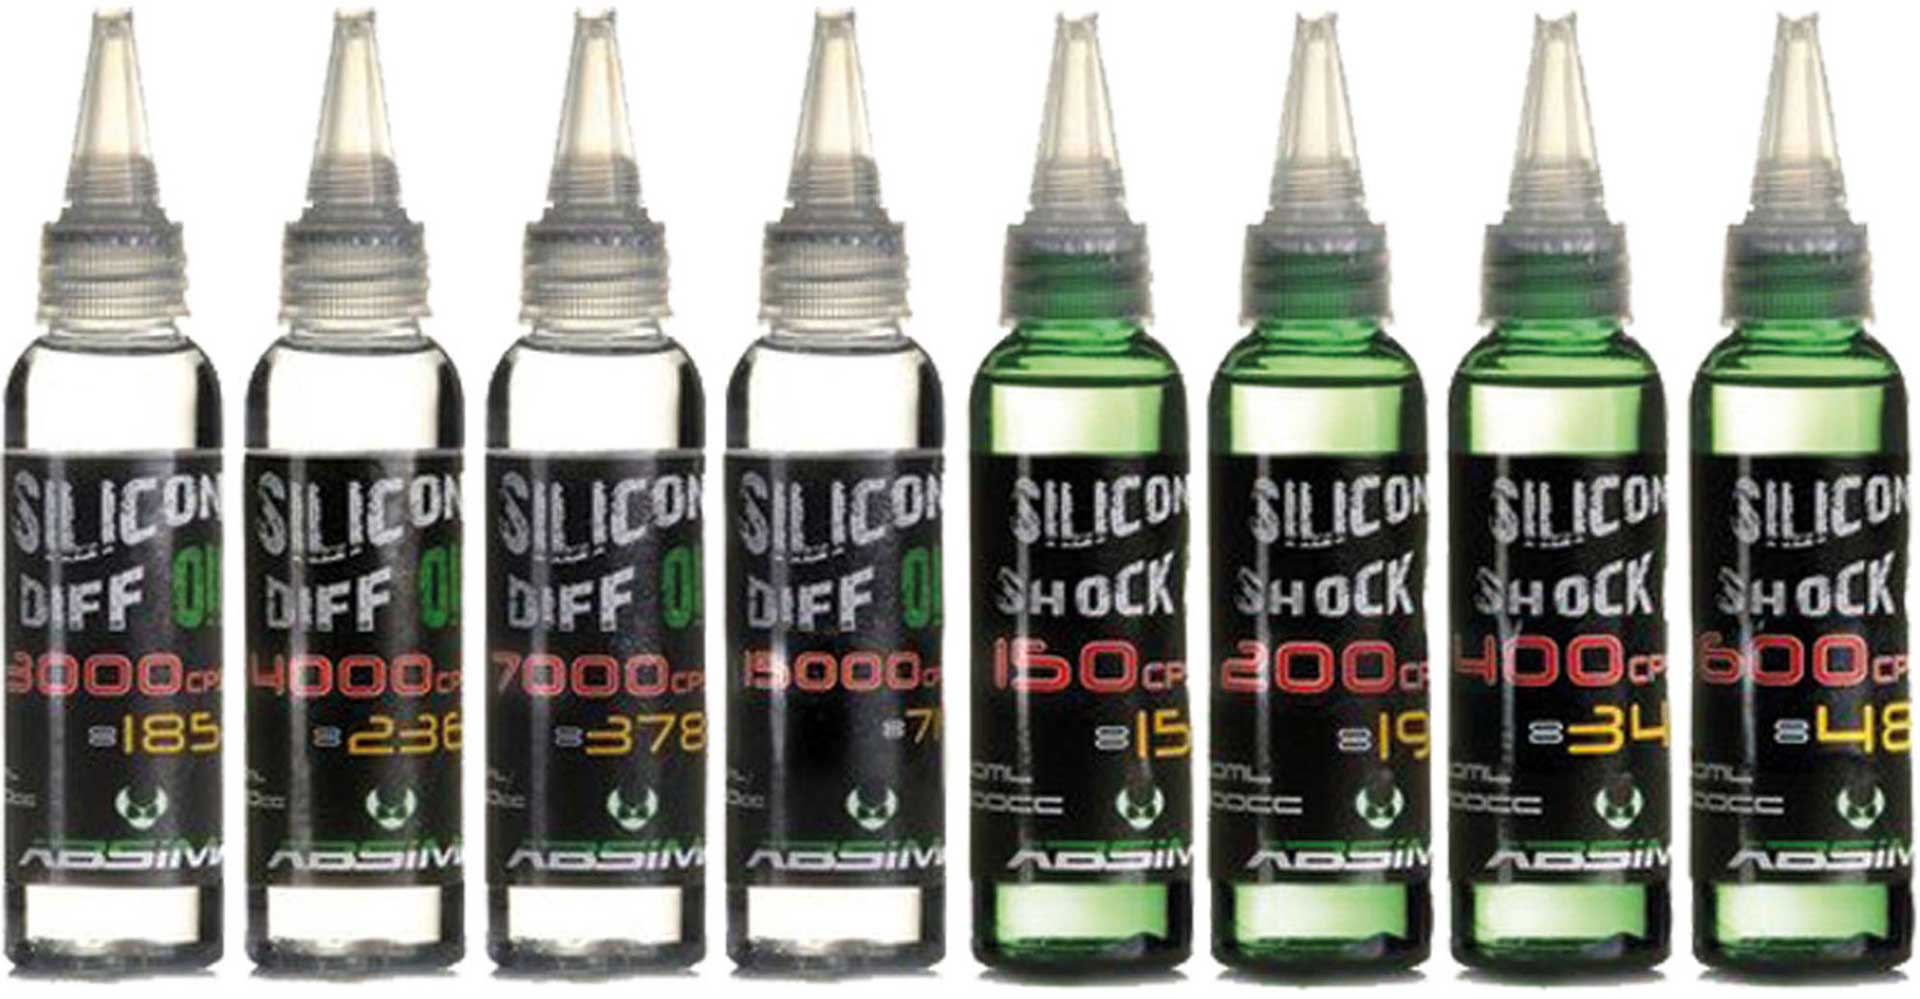 ABSIMA SILICONE DIFFERENTIAL OIL 1000000CPS 60ML